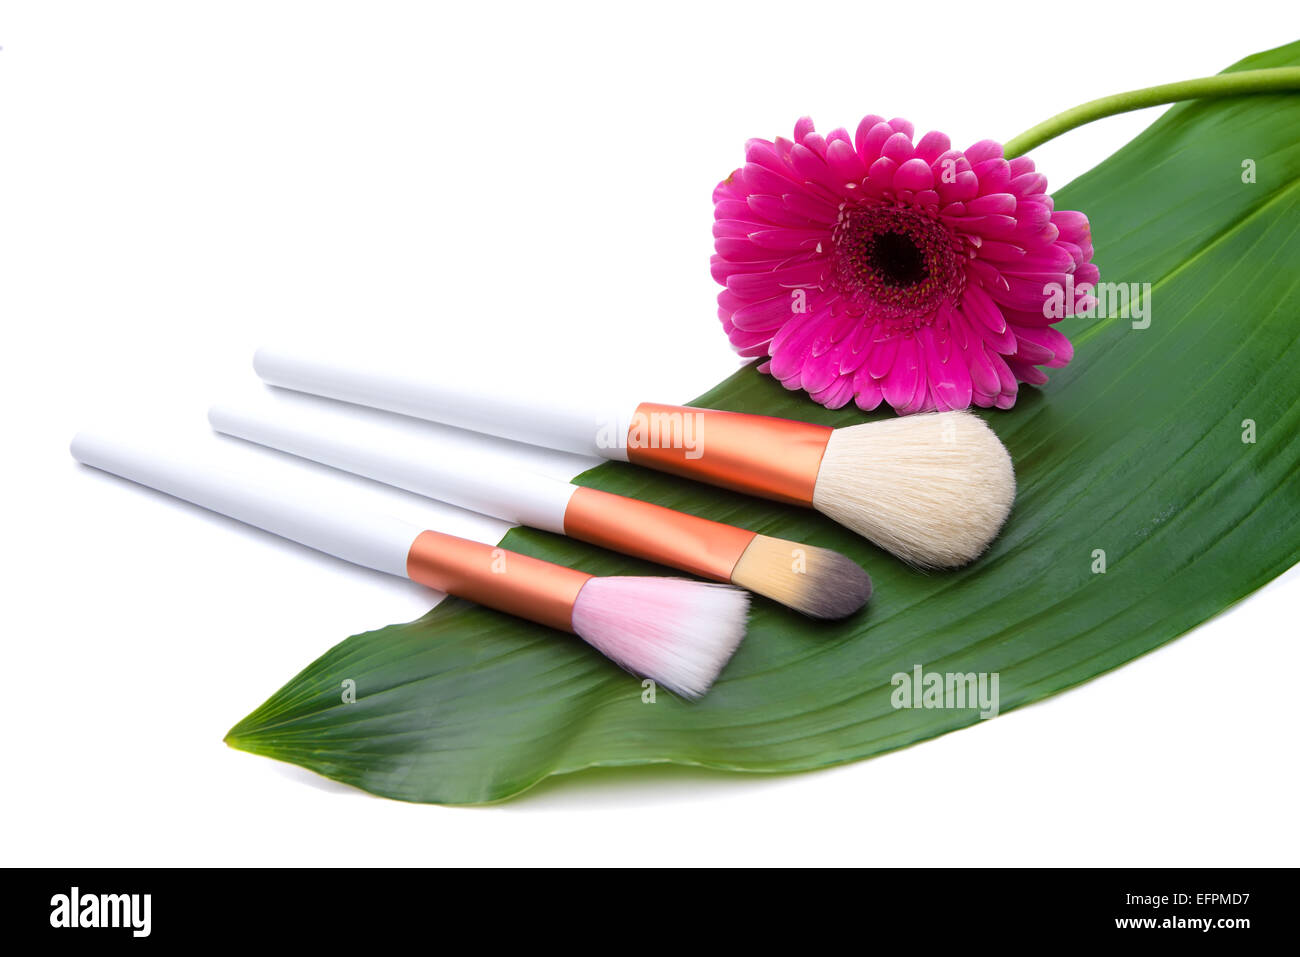 Makeup Brushes on green leaf with flower Stock Photo